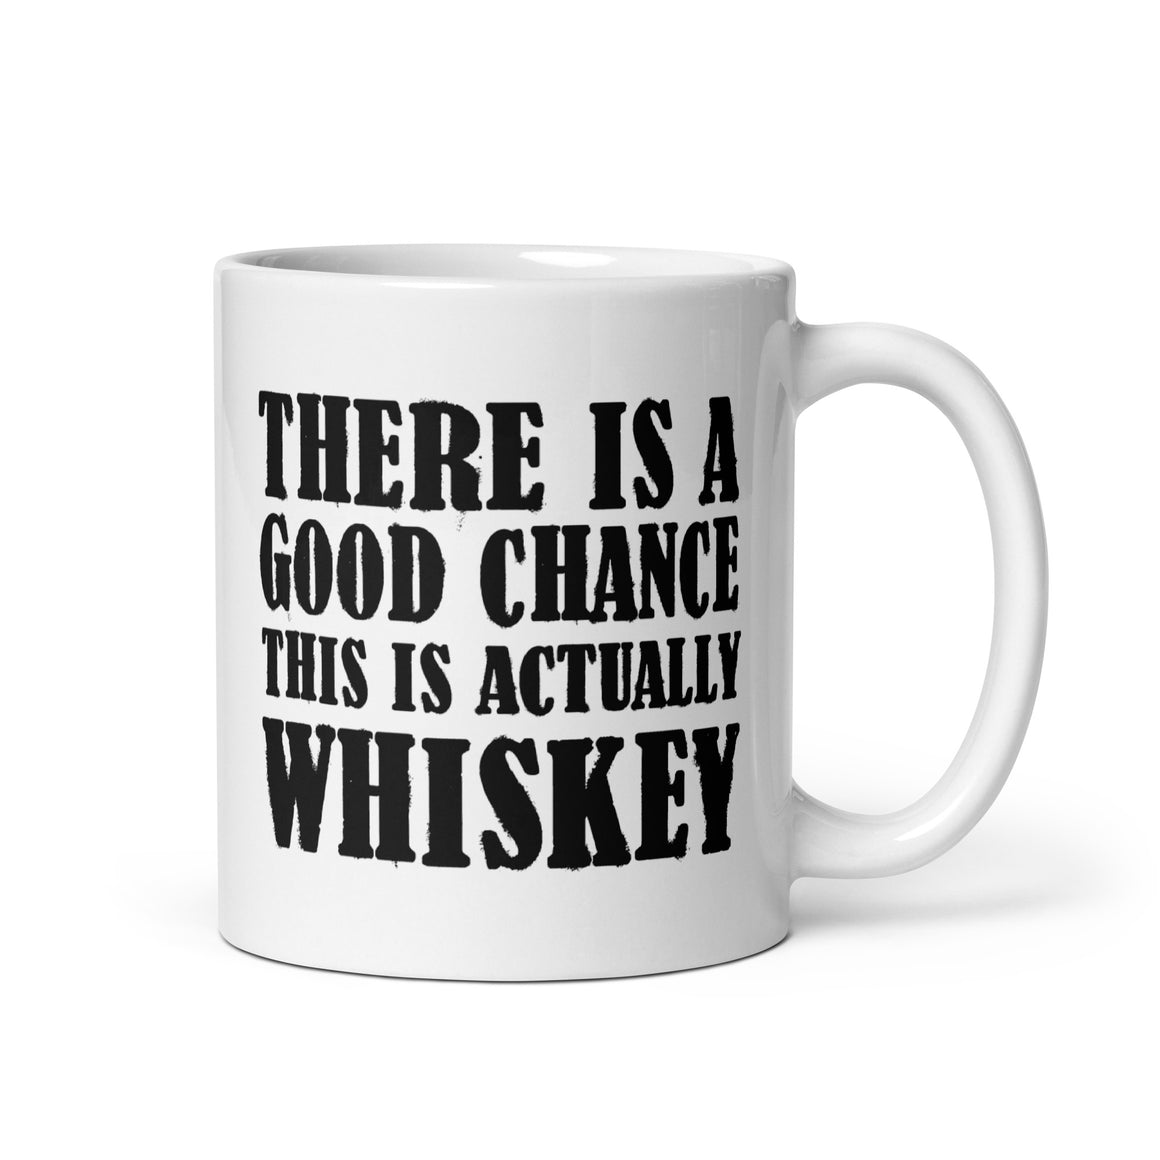 There is a Good Chance This is Whiskey Coffee Mug by Libertarian Country